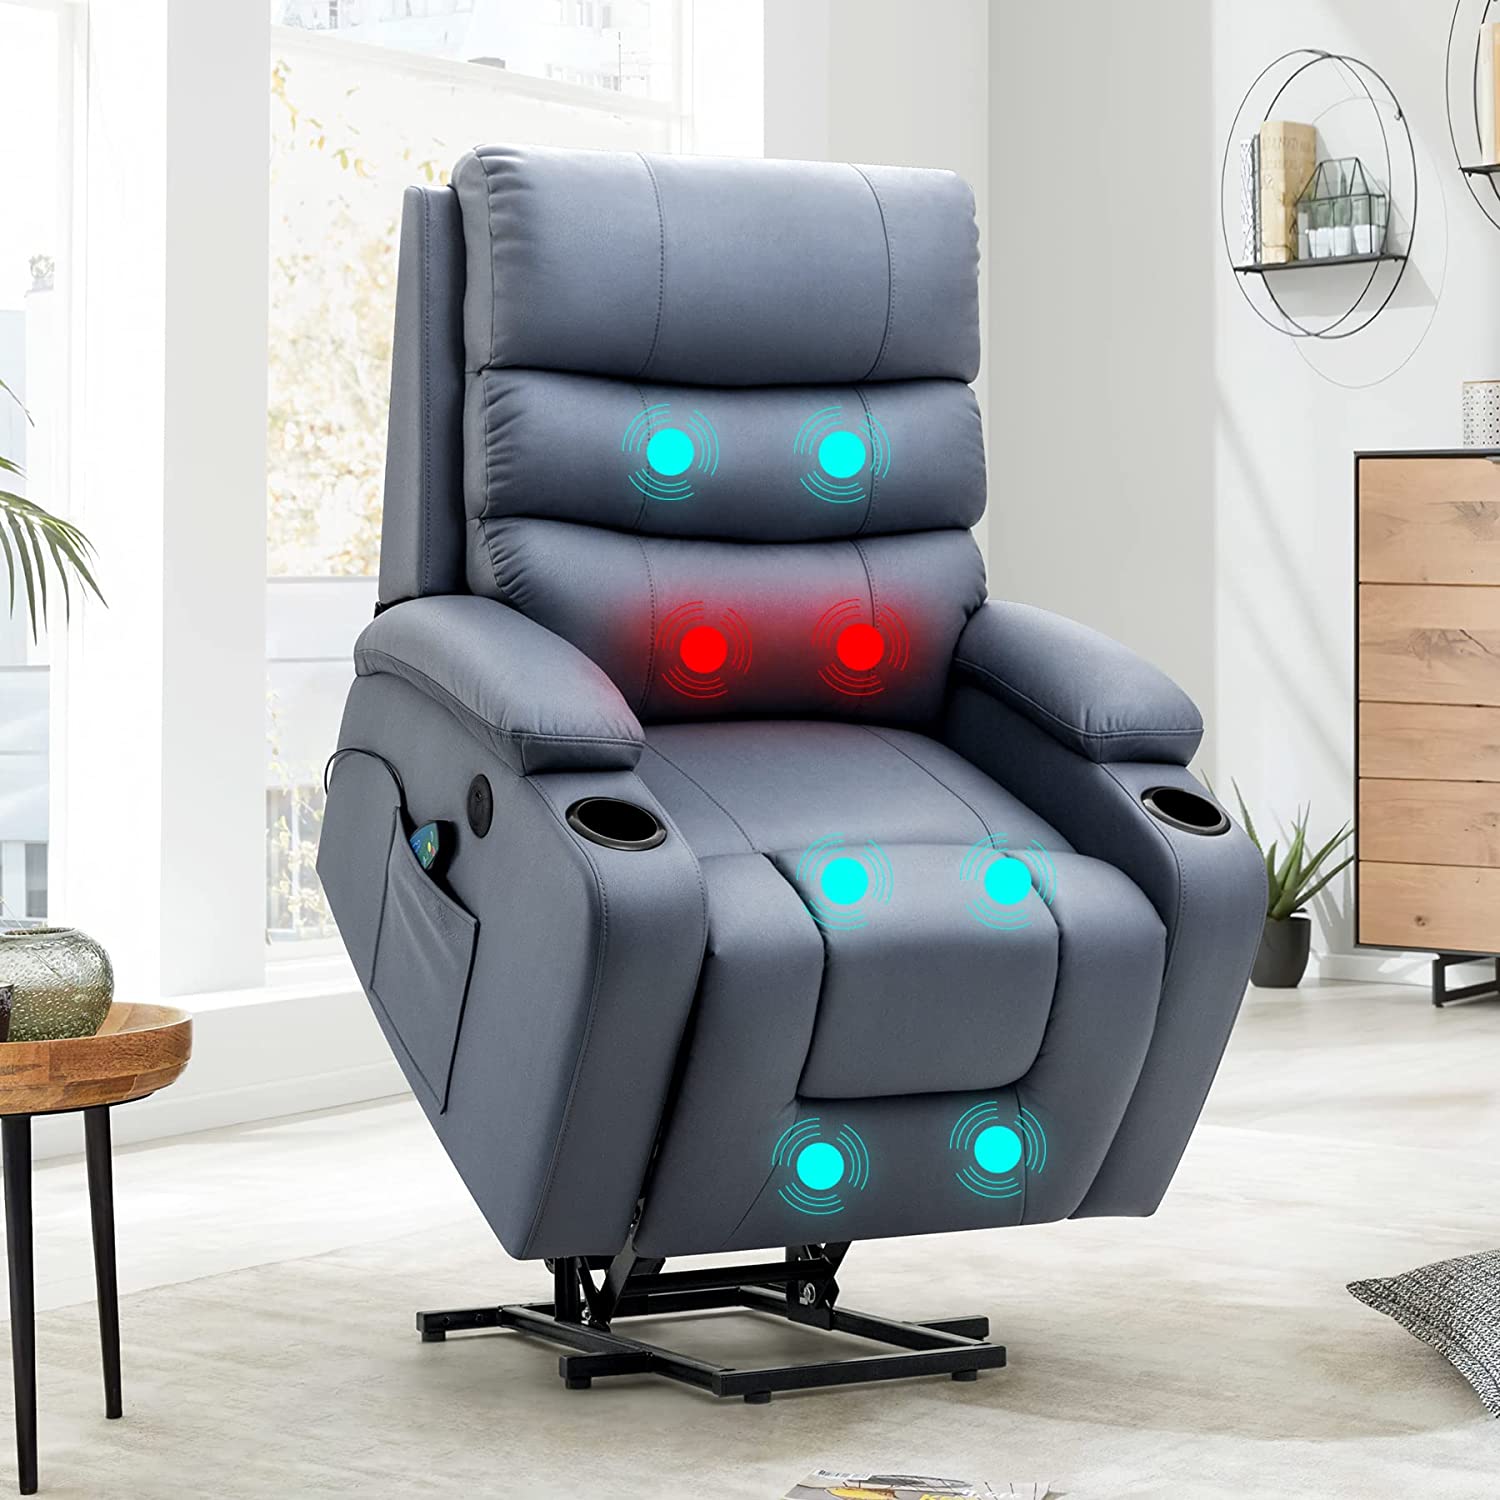 homrest-power-lift-recliner-chair-with-massage-heat-for-elderly-microfiber-electric-recliner-with-2-pockets-cup-holders-usb-port-blue